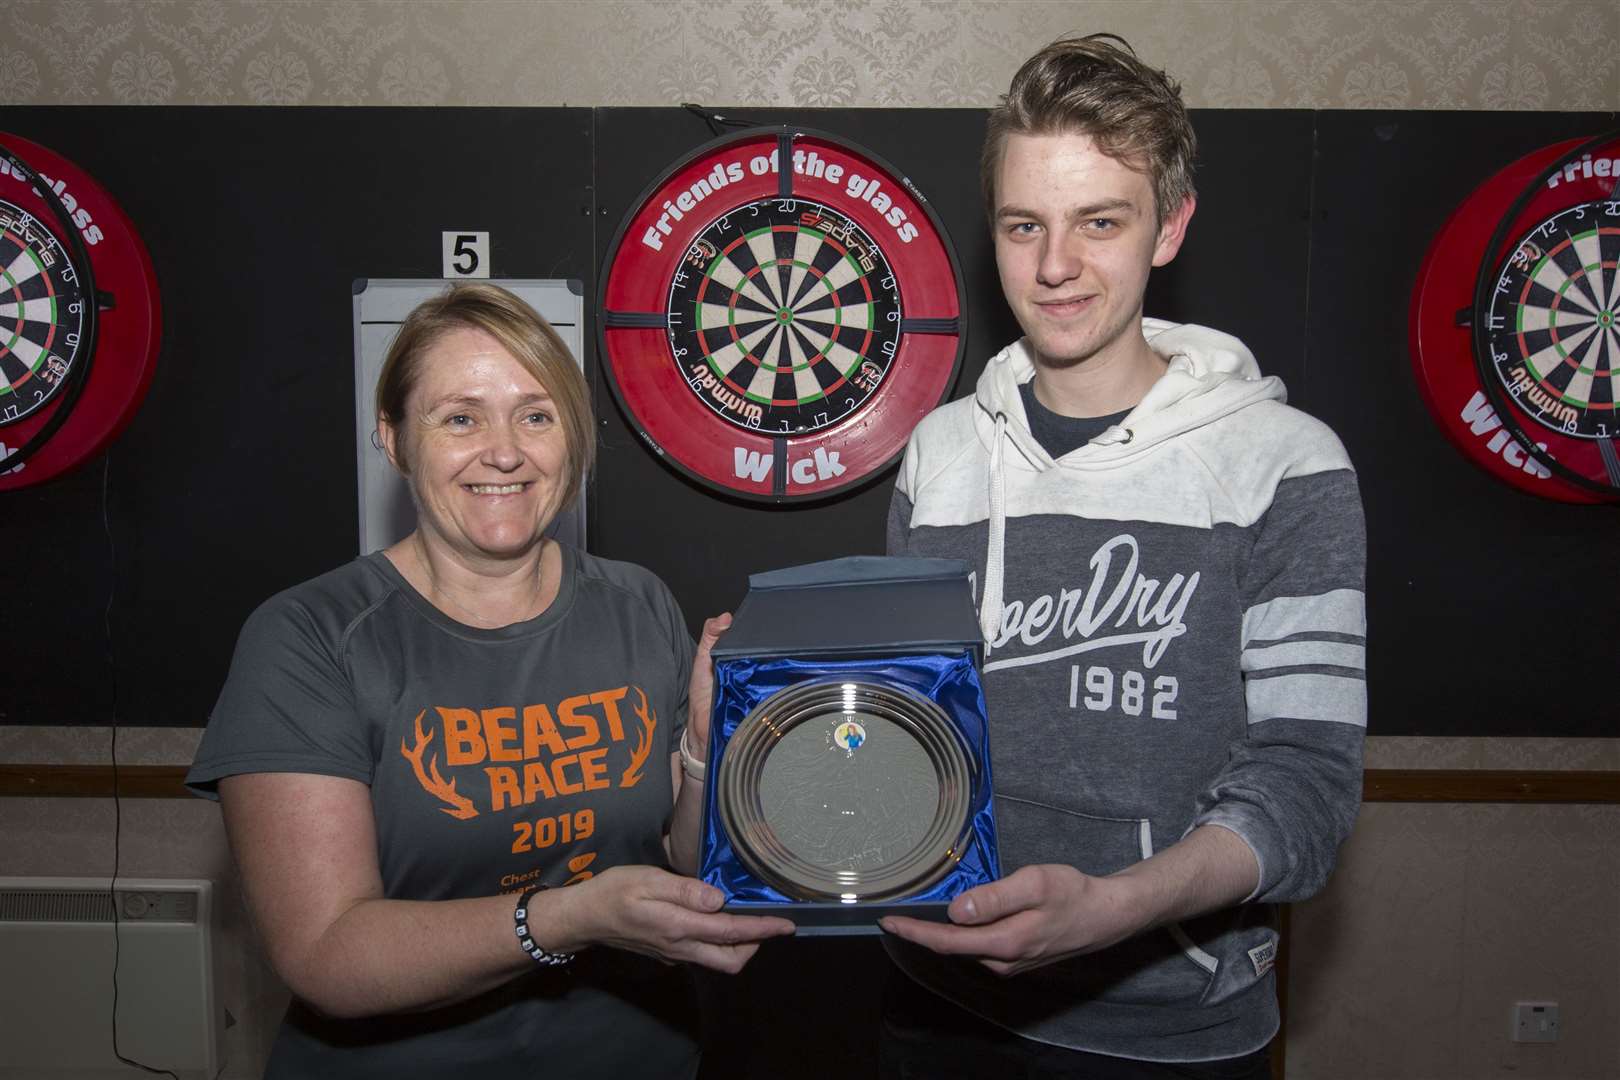 Cath Begg, one of the stalwarts of the ladies' darts scene in Caithness, is retiring from the game and has received a lifetime award from the Wick and District Darts League. Cath, from Keiss, began playing for her village pub team around 26 years ago, moving on about 15 years later to the Smiddy Inn for a few seasons and then to the Crown Bar team which she has represented until her newly announced retiral. The presentation was made by Scott Crowden. Picture: Robert MacDonald / Northern Studios